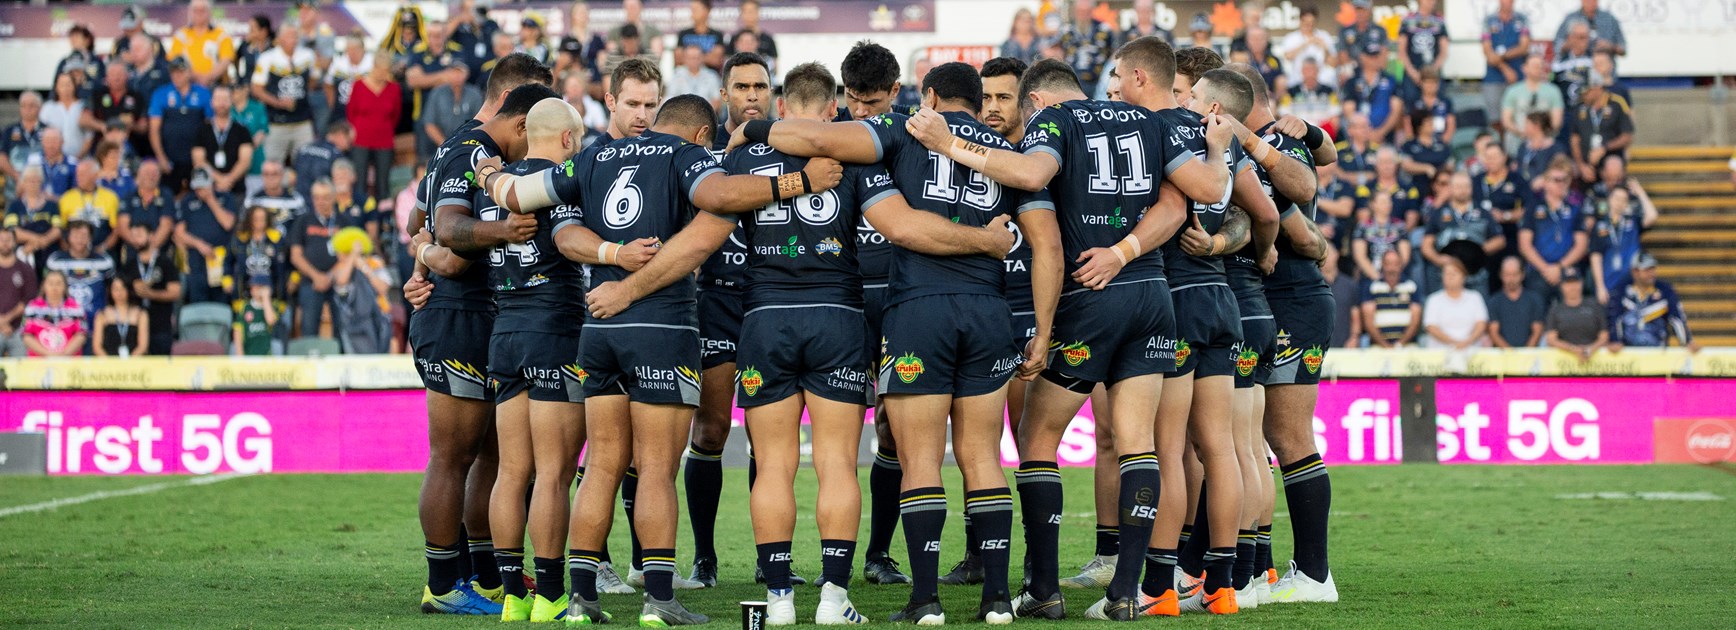 NRL Team of the Week: Round 10 results